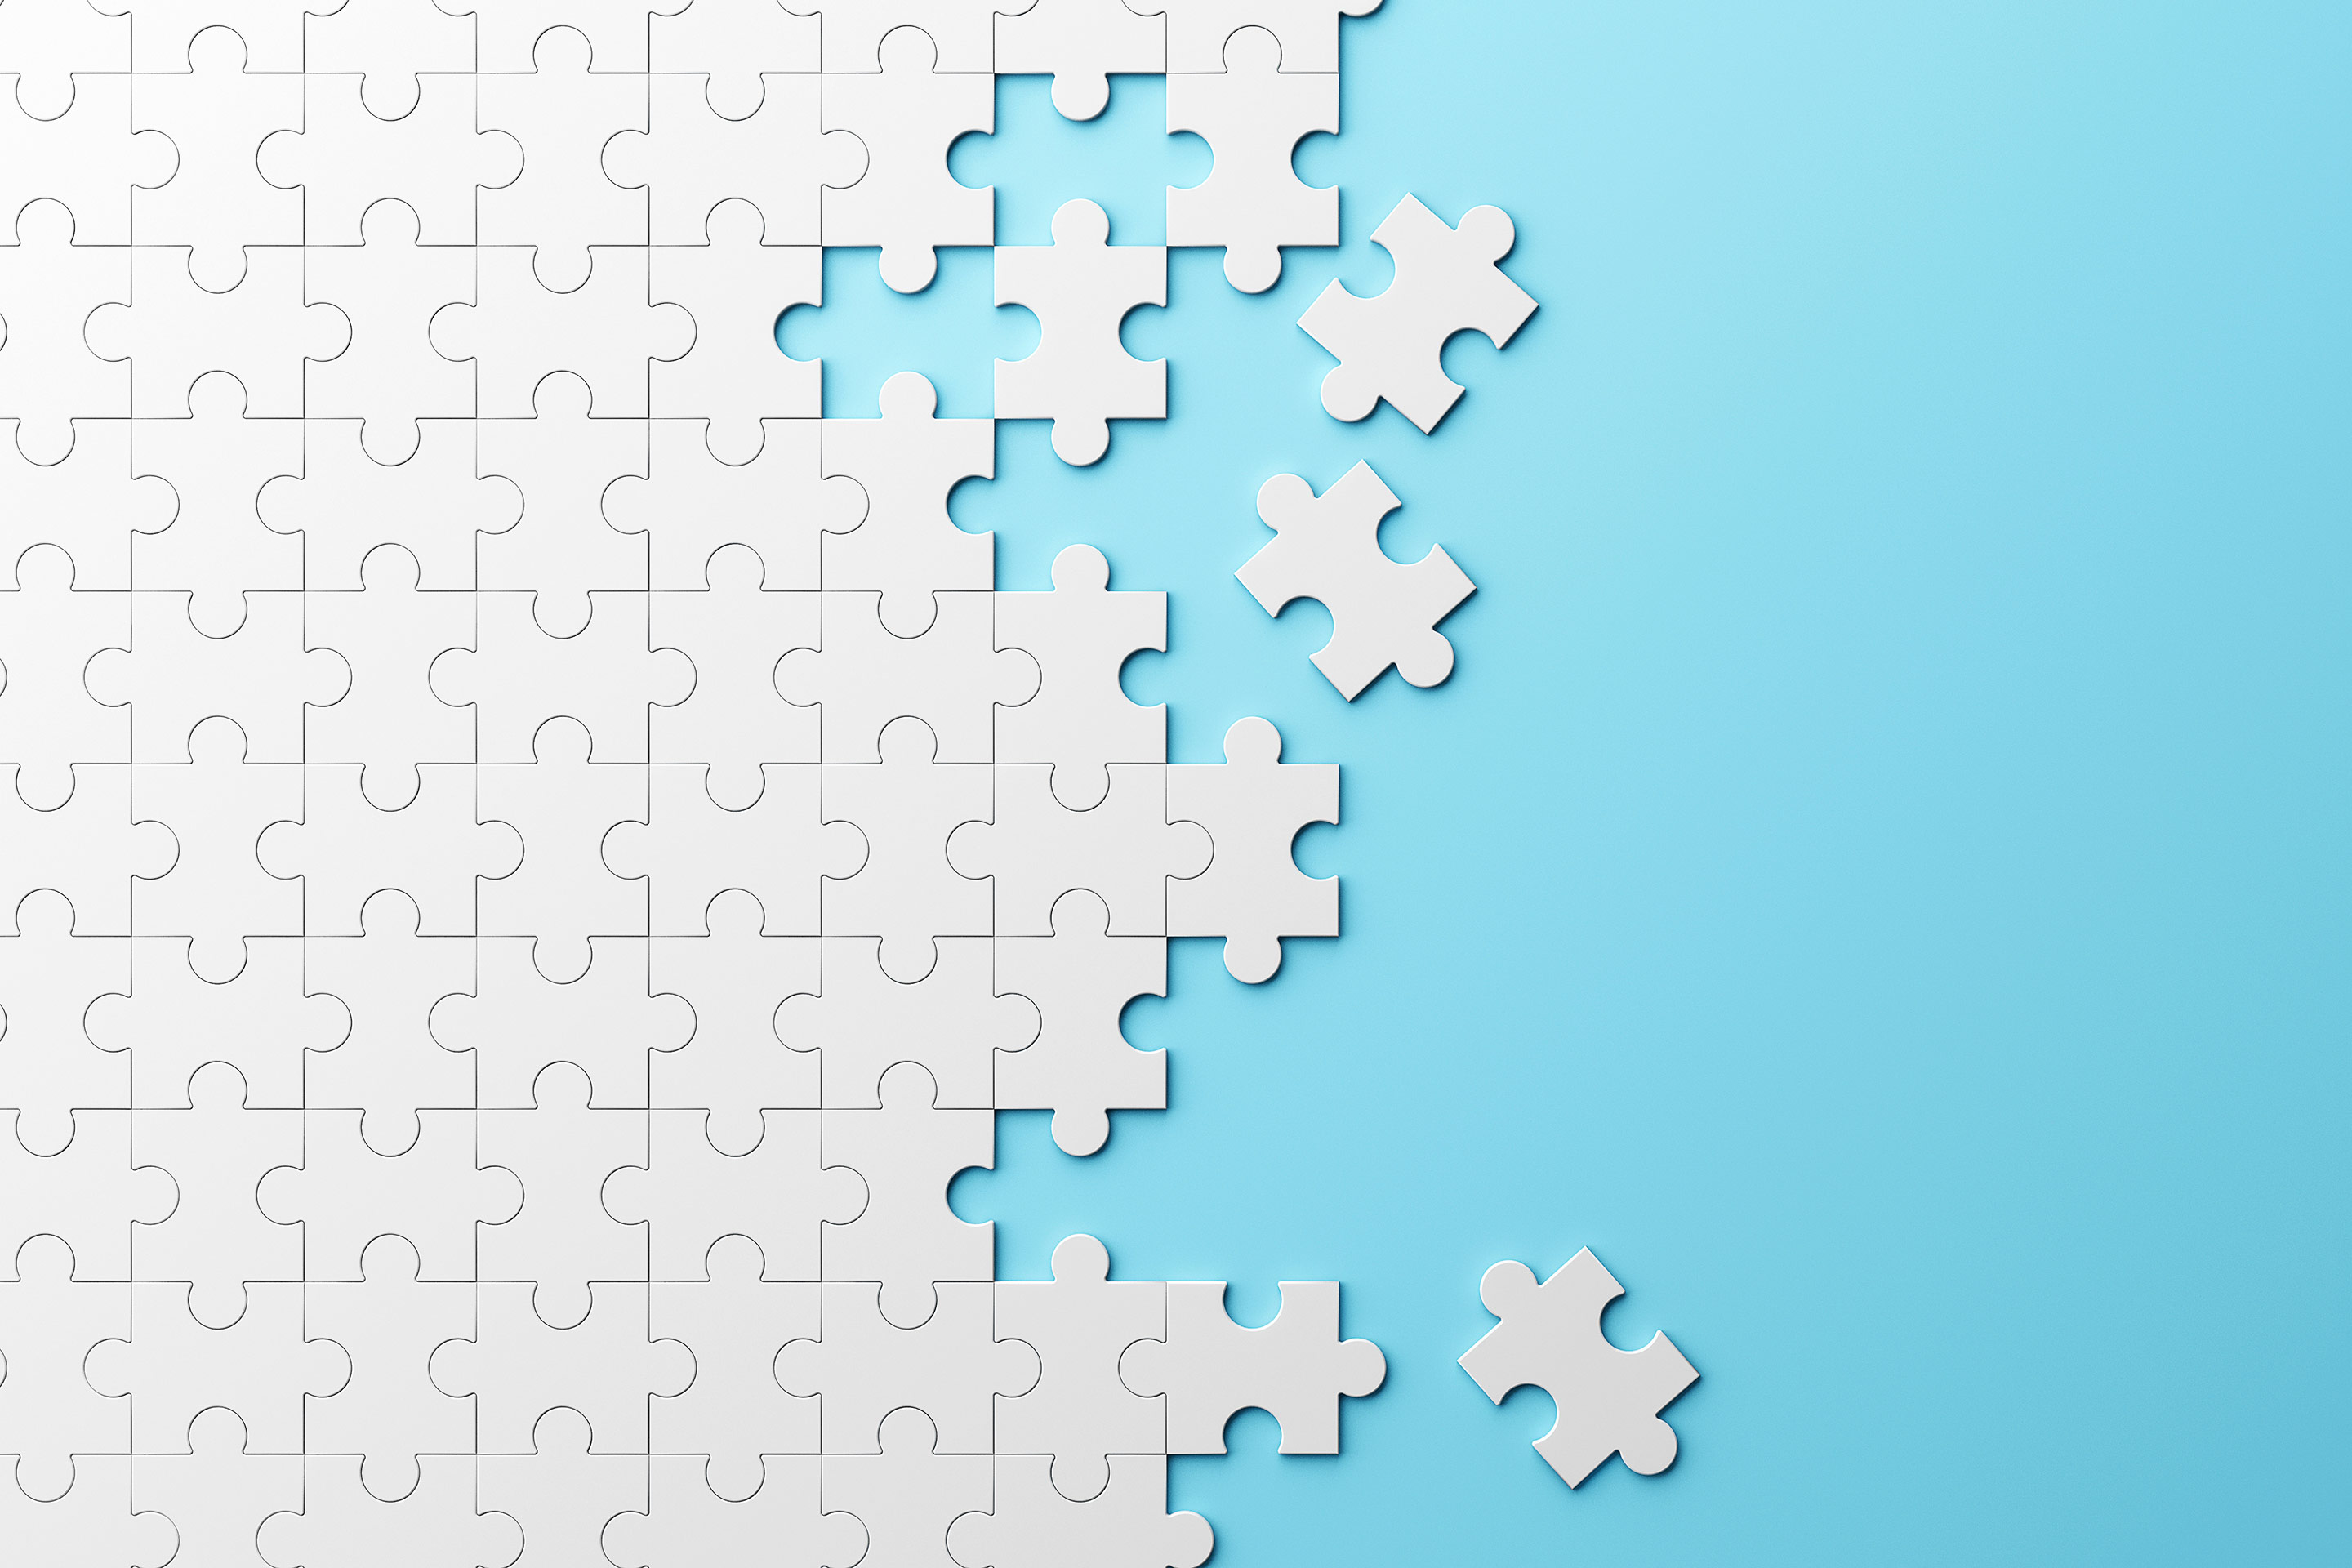 White puzzle pieces connect together across a blue background representing connectivity.